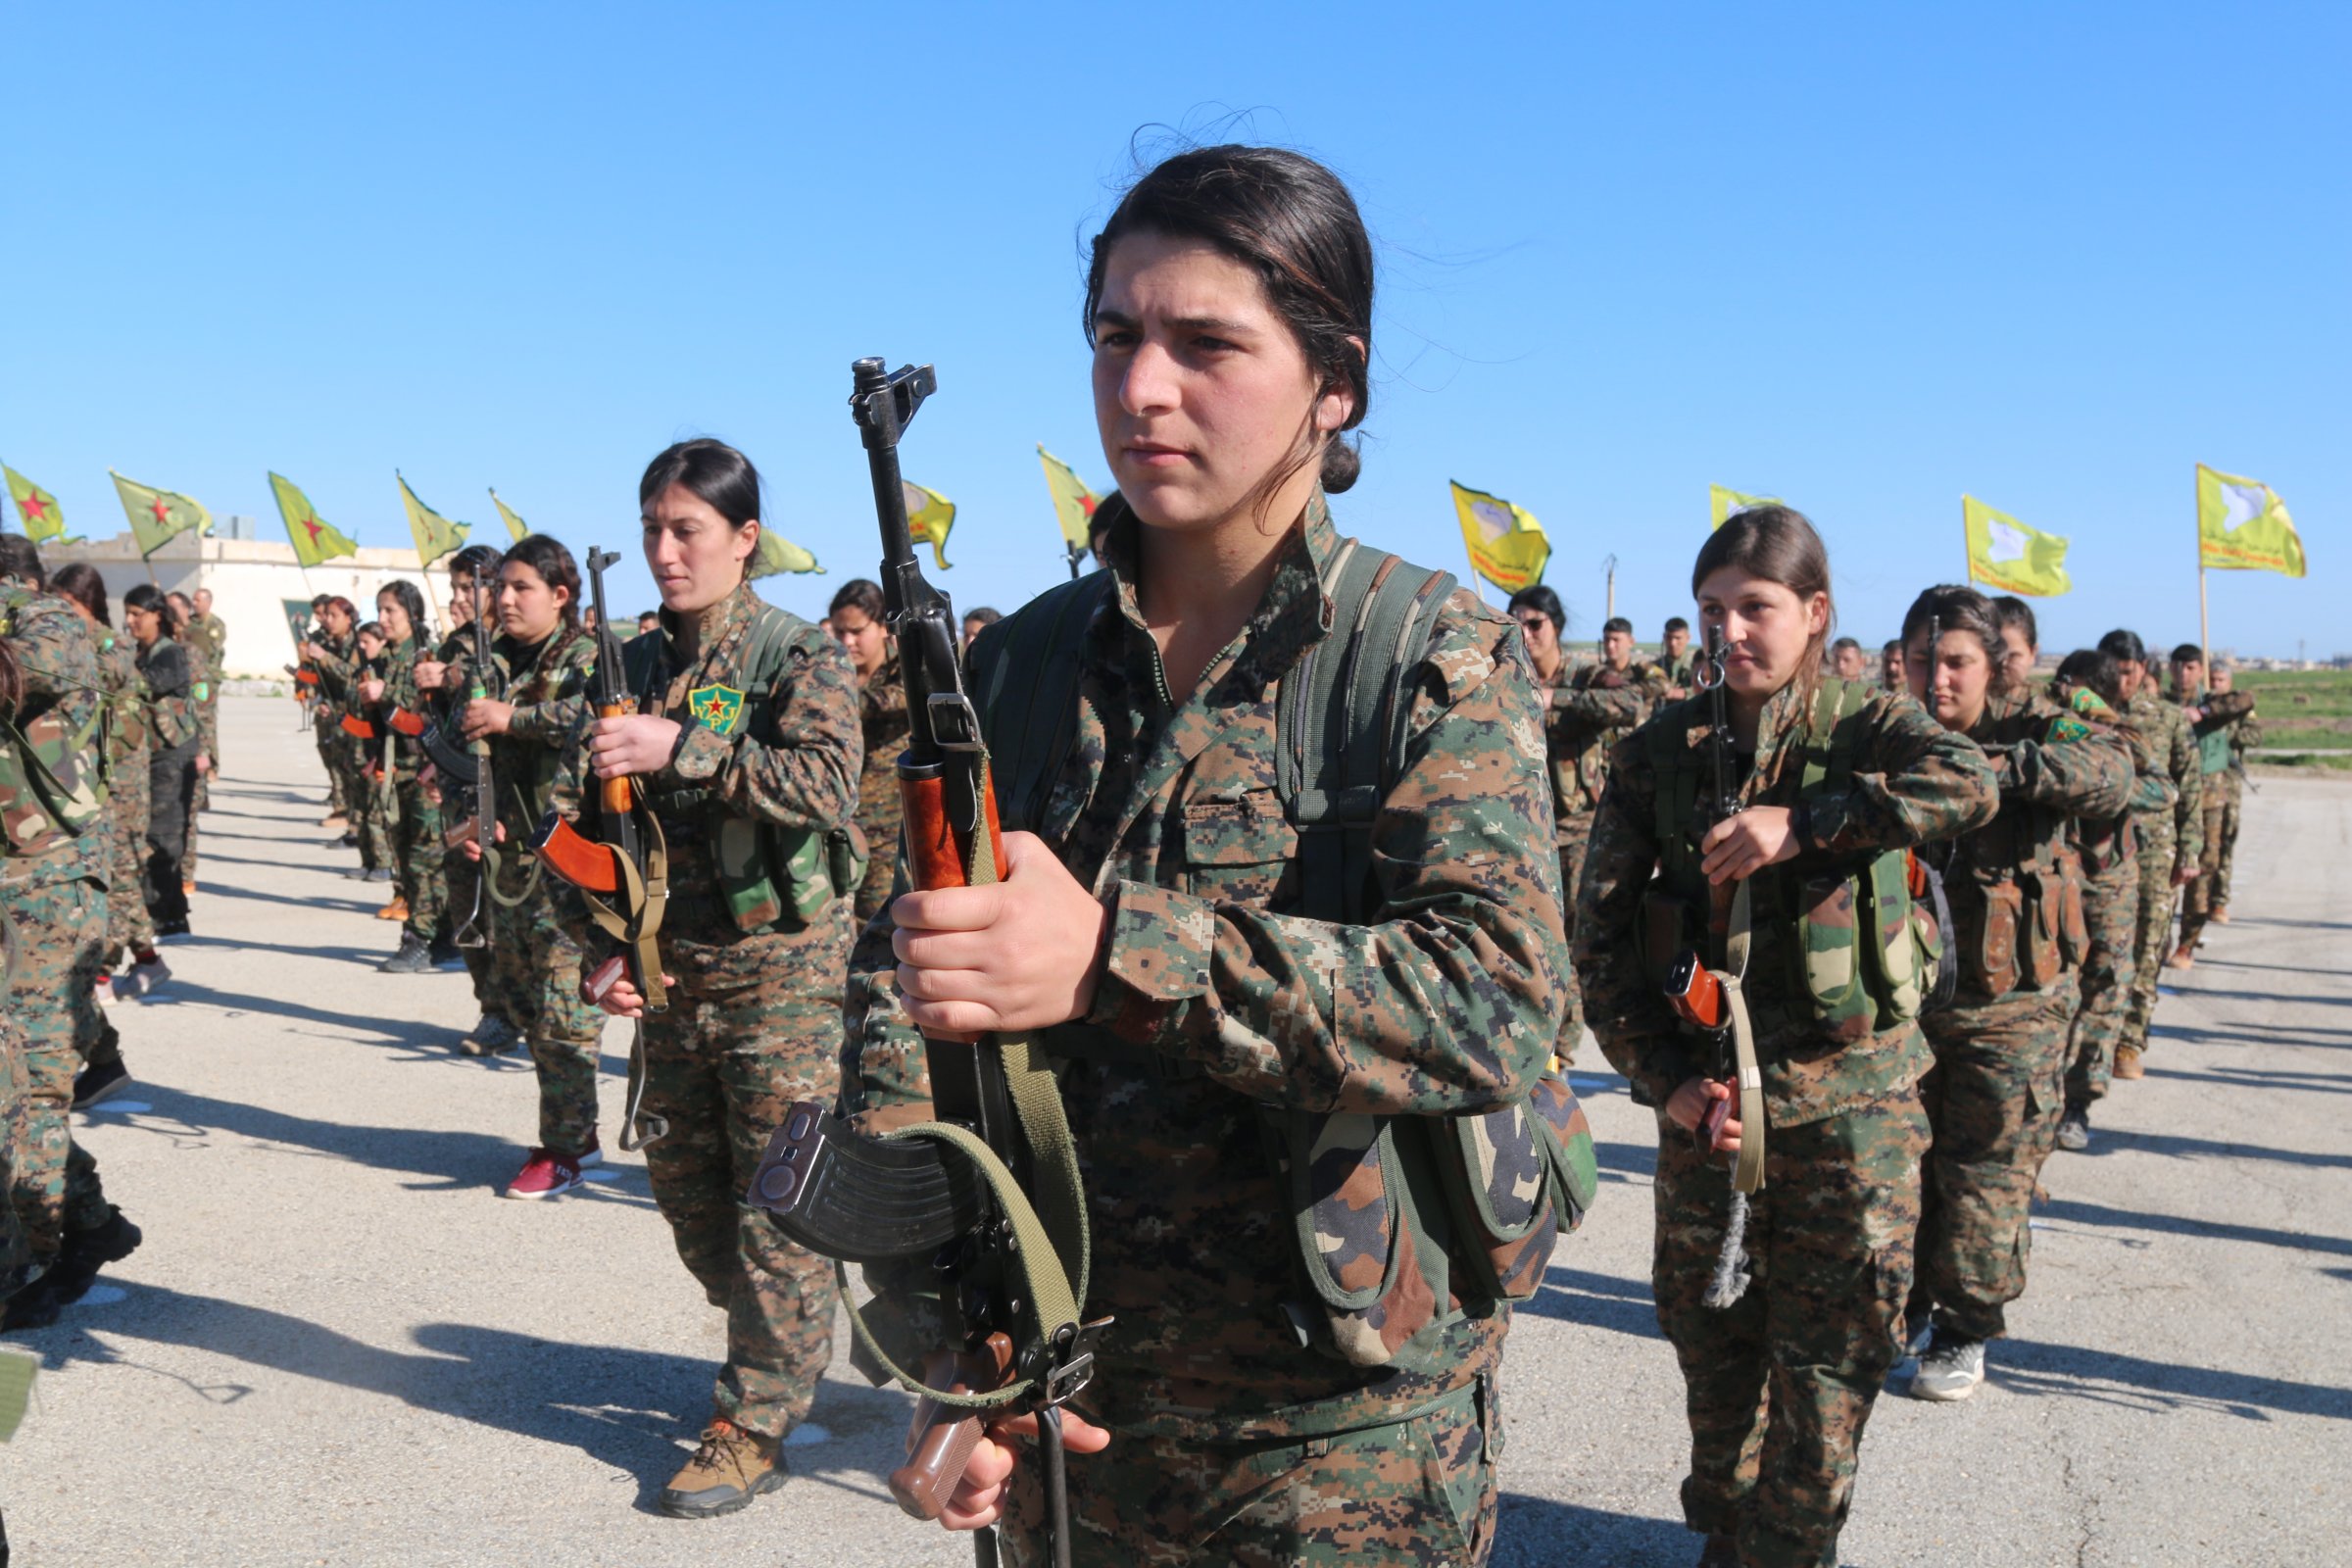 Members of the Women's Protection Units in northeast Syria, July 2018